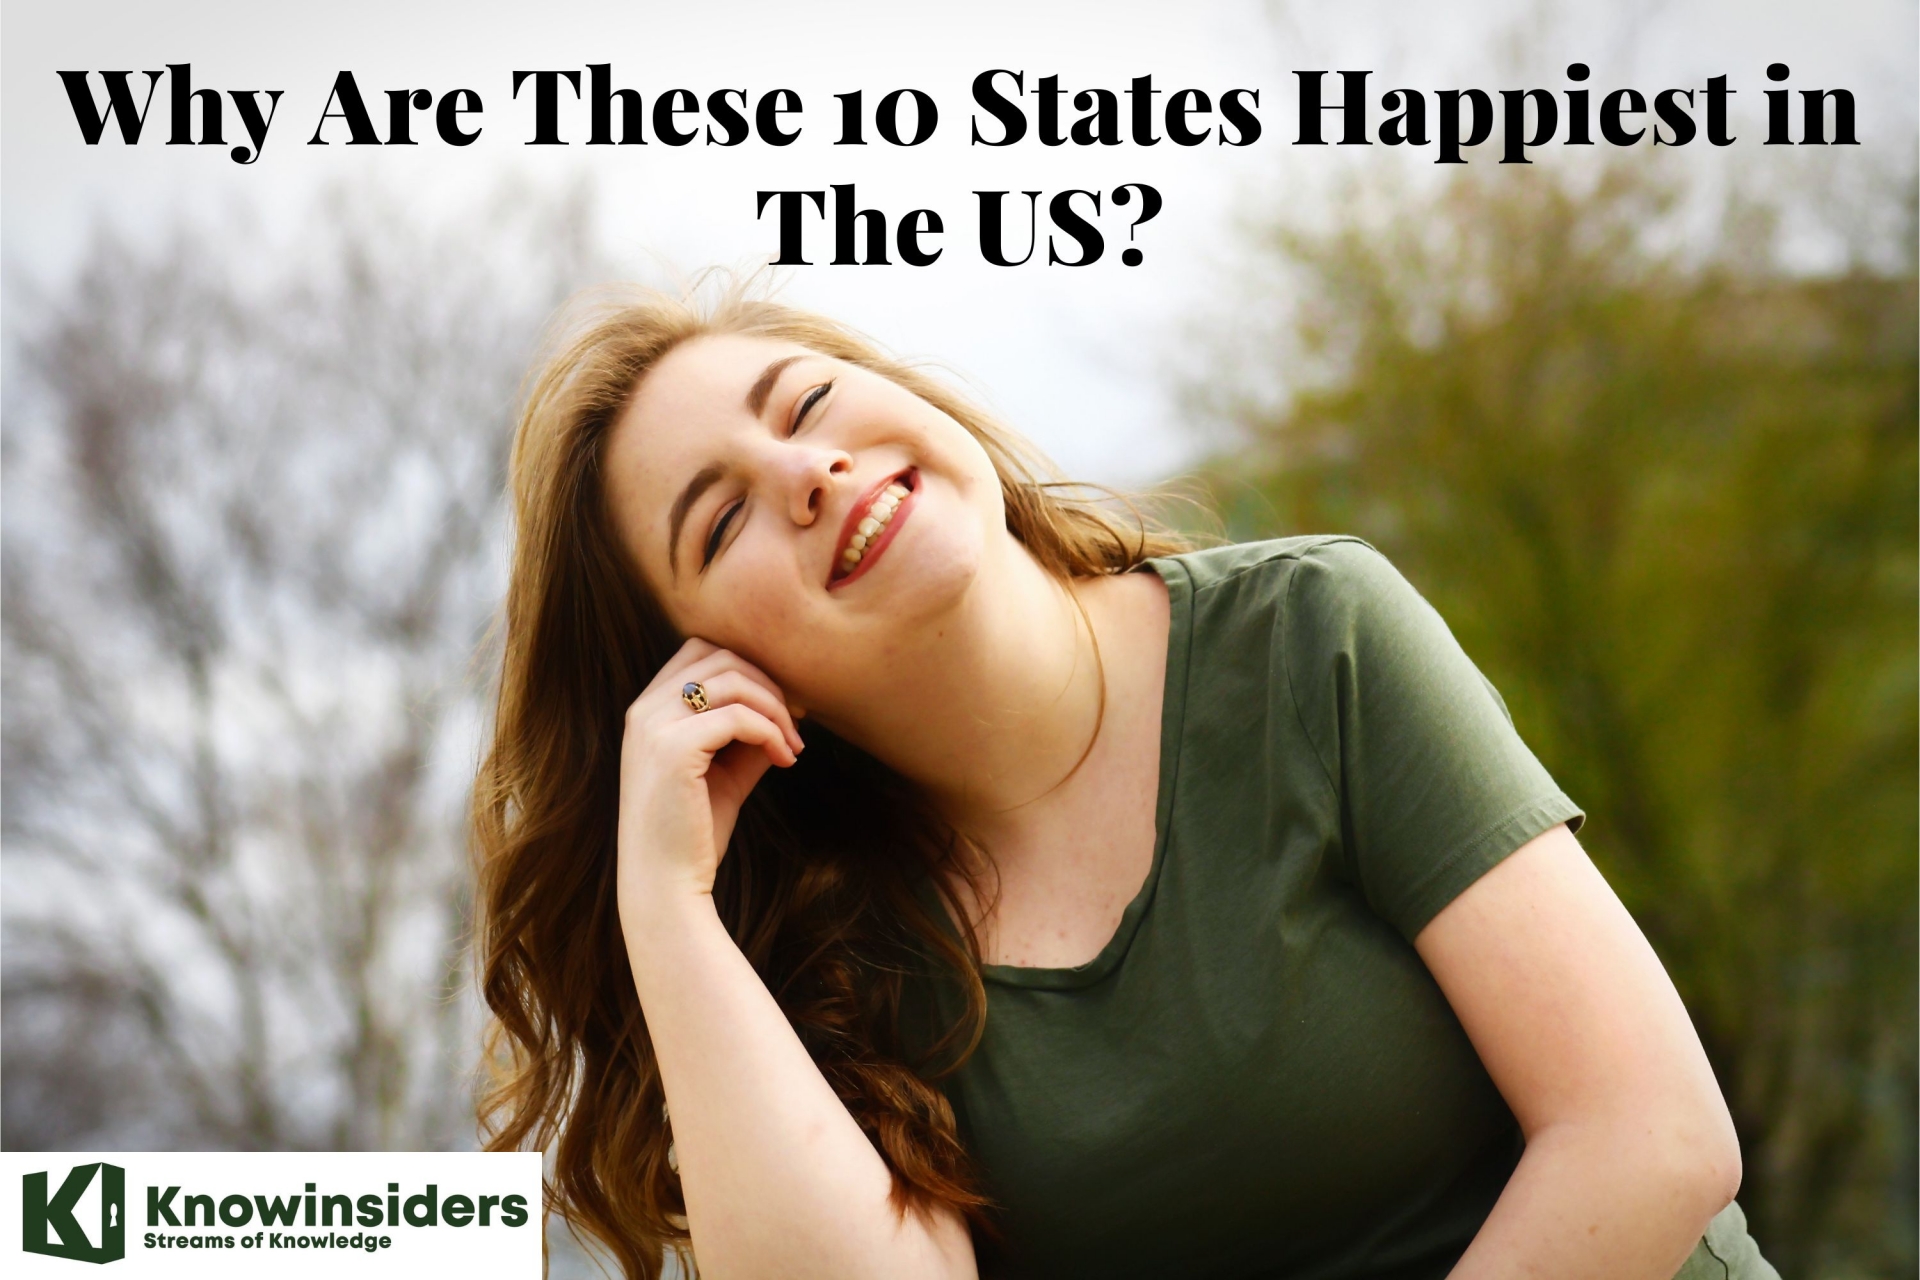 Why Are These 10 States Happiest in The US?